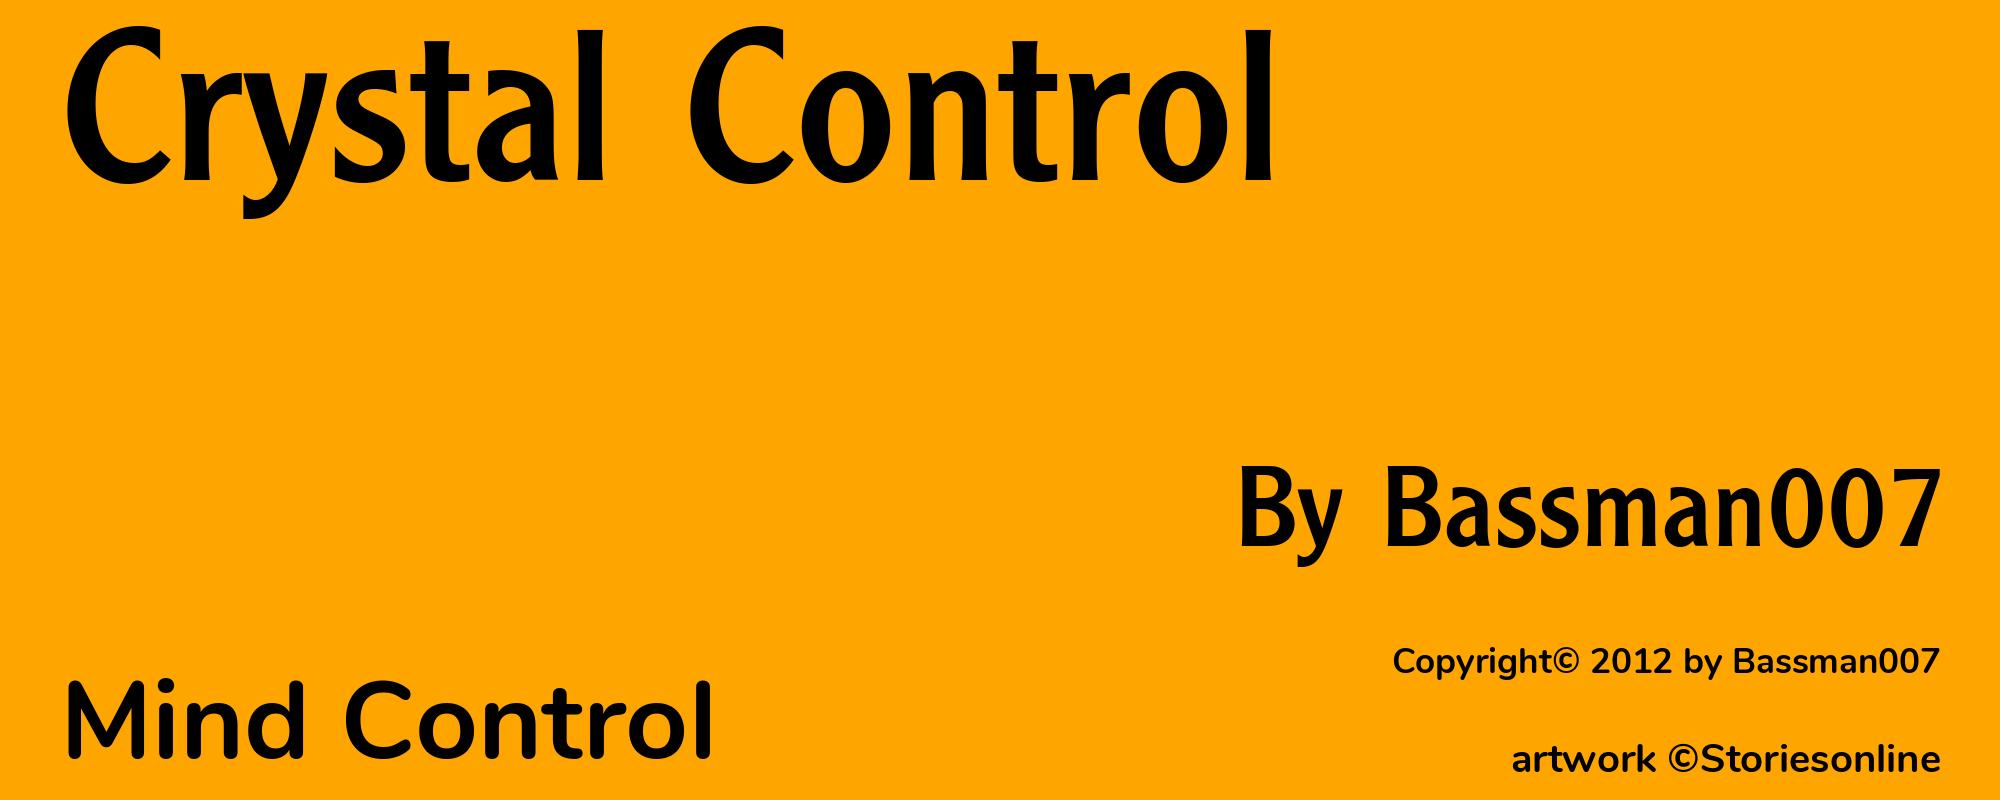 Crystal Control - Cover